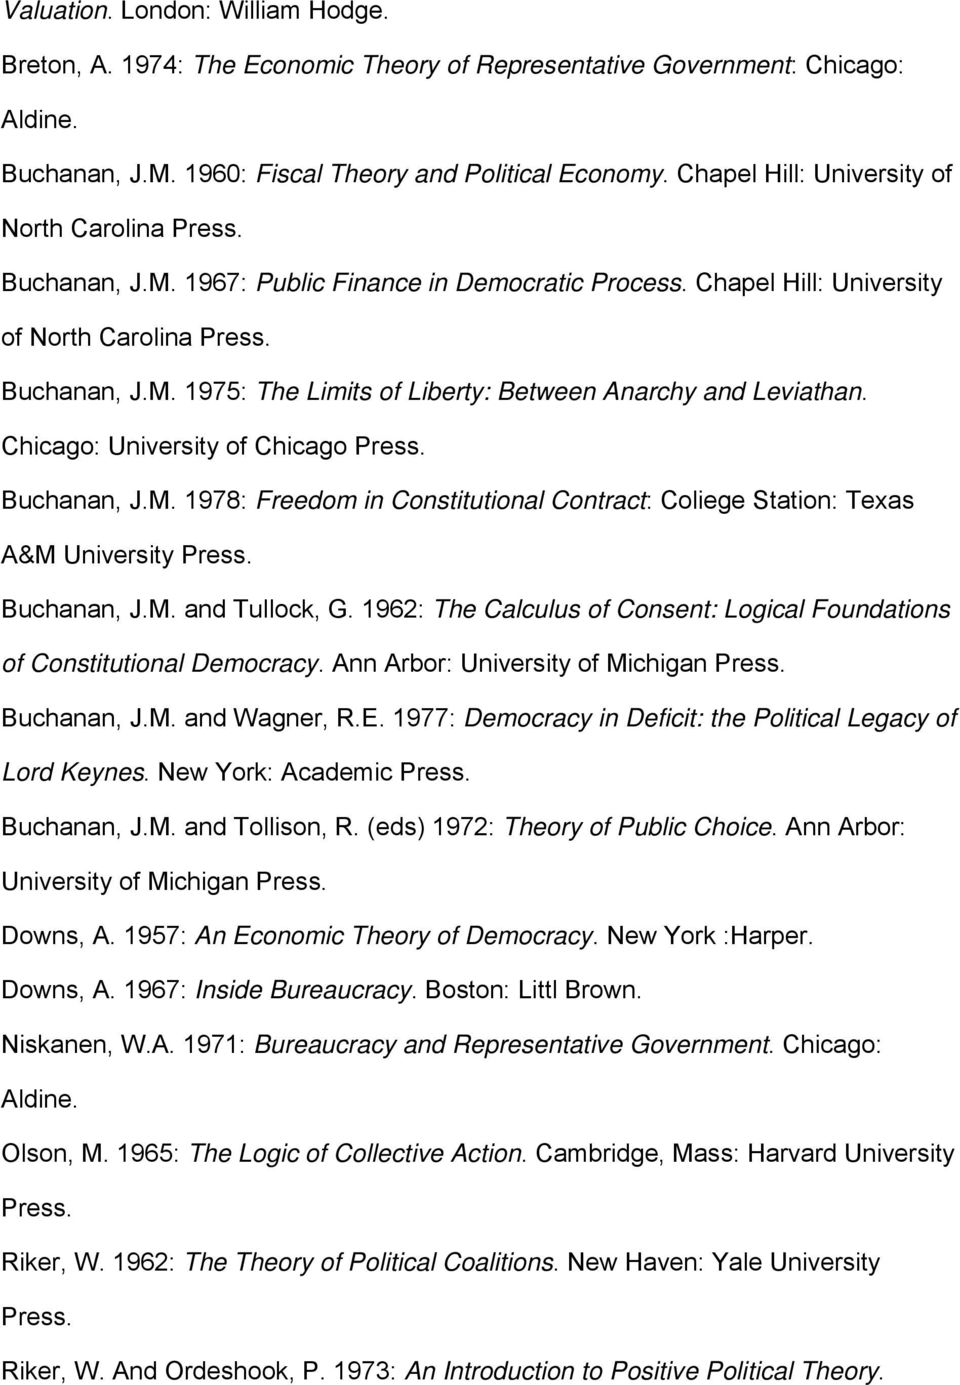 Chicago: University of Chicago Press. Buchanan, J.M. 1978: Freedom in Constitutional Contract: Coliege Station: Texas A&M University Press. Buchanan, J.M. and Tullock, G.